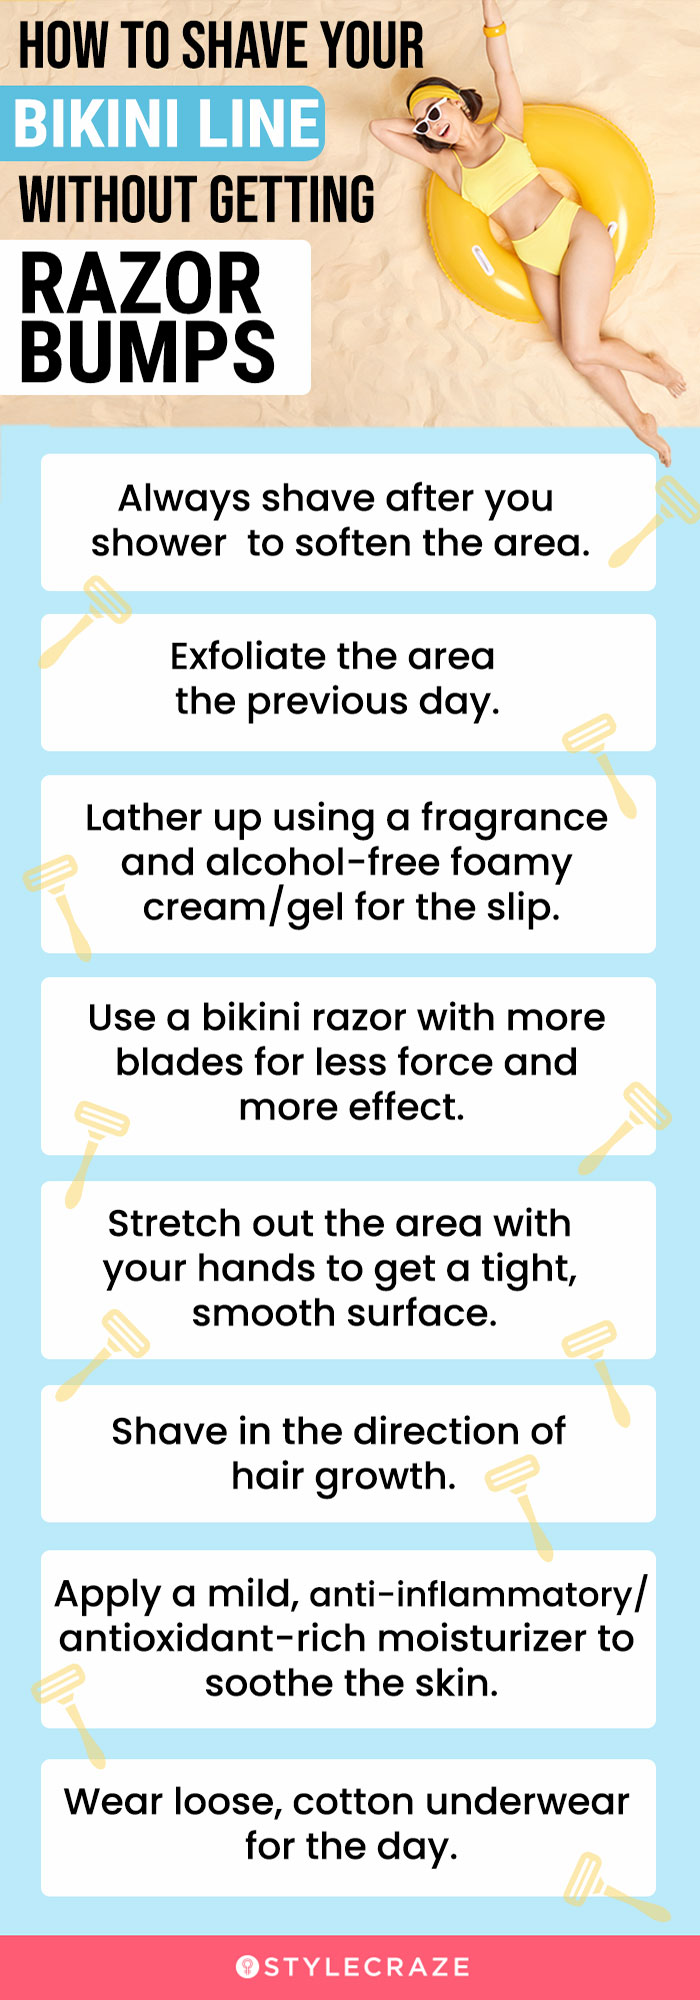 How To Shave Your Bikini Line [infographic]